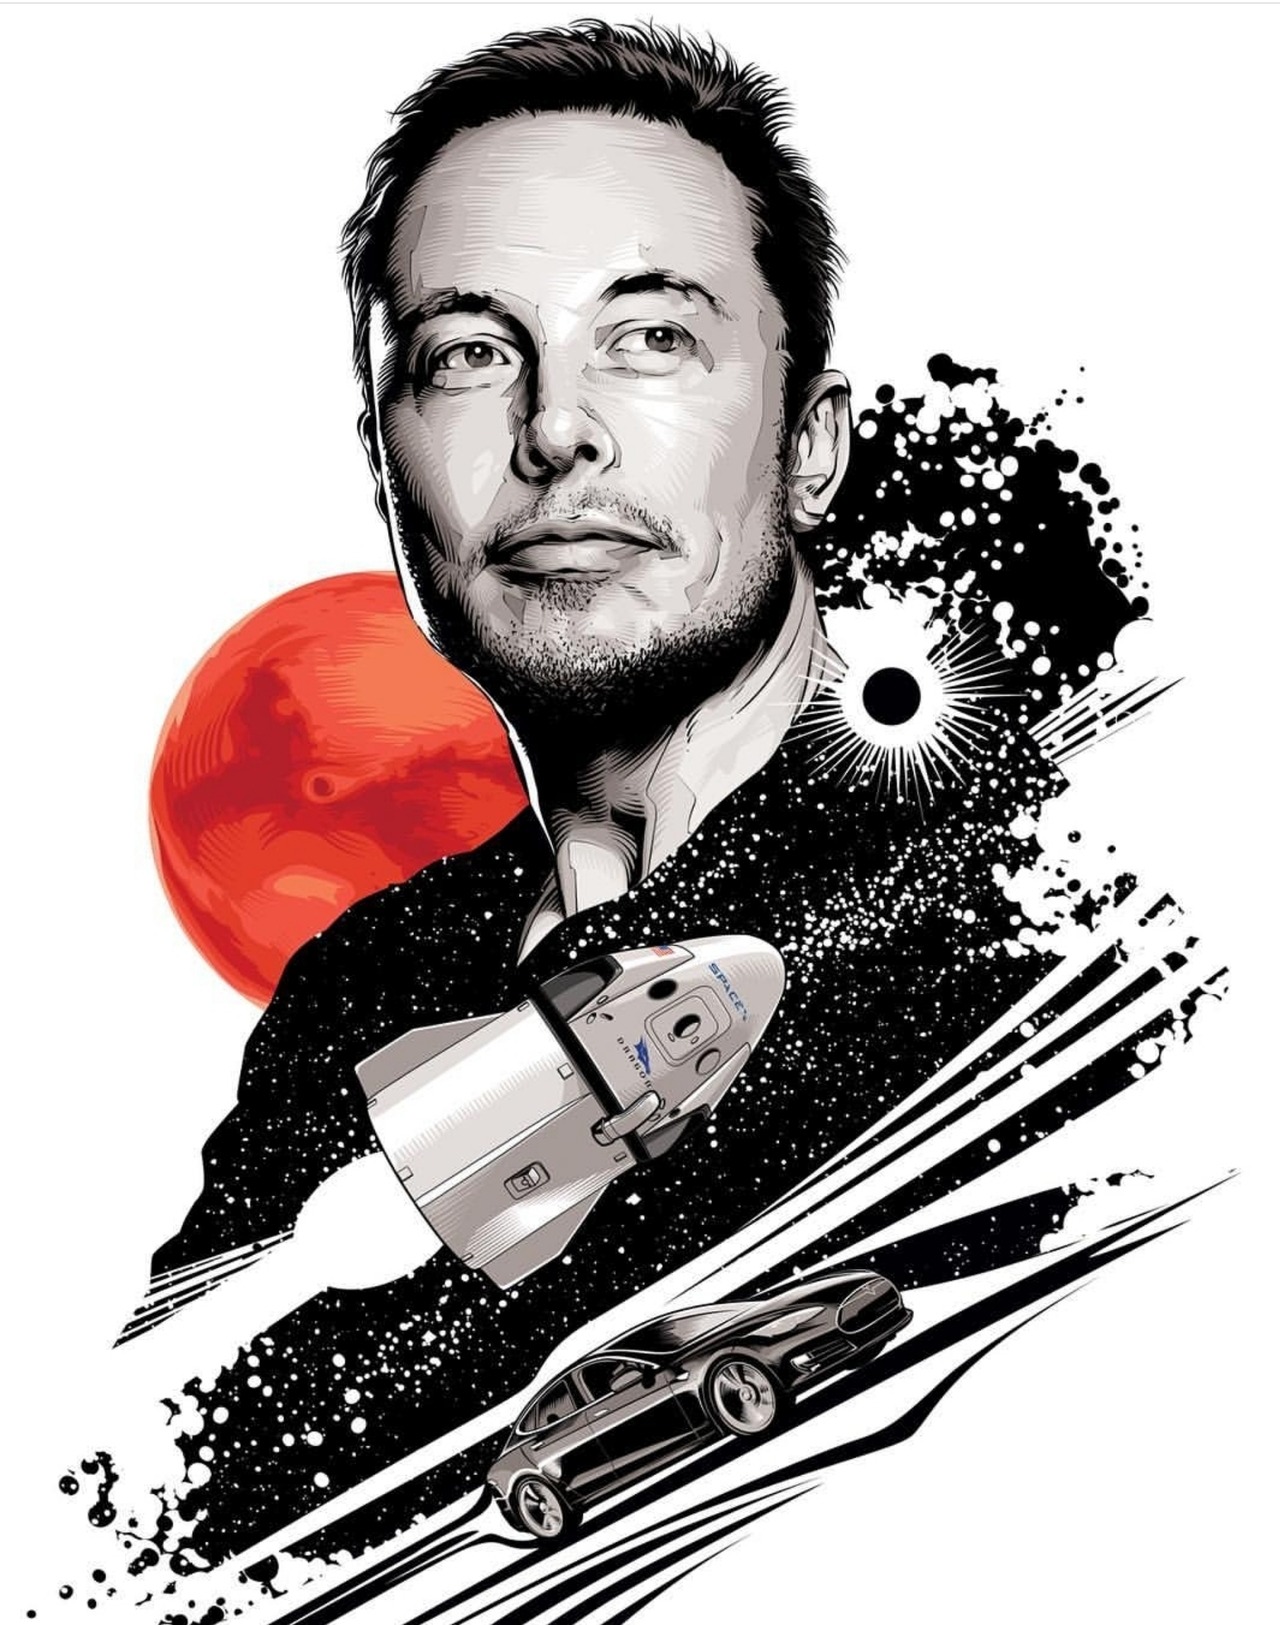 another fan — Awesome Elon Musk art by Cristiano...